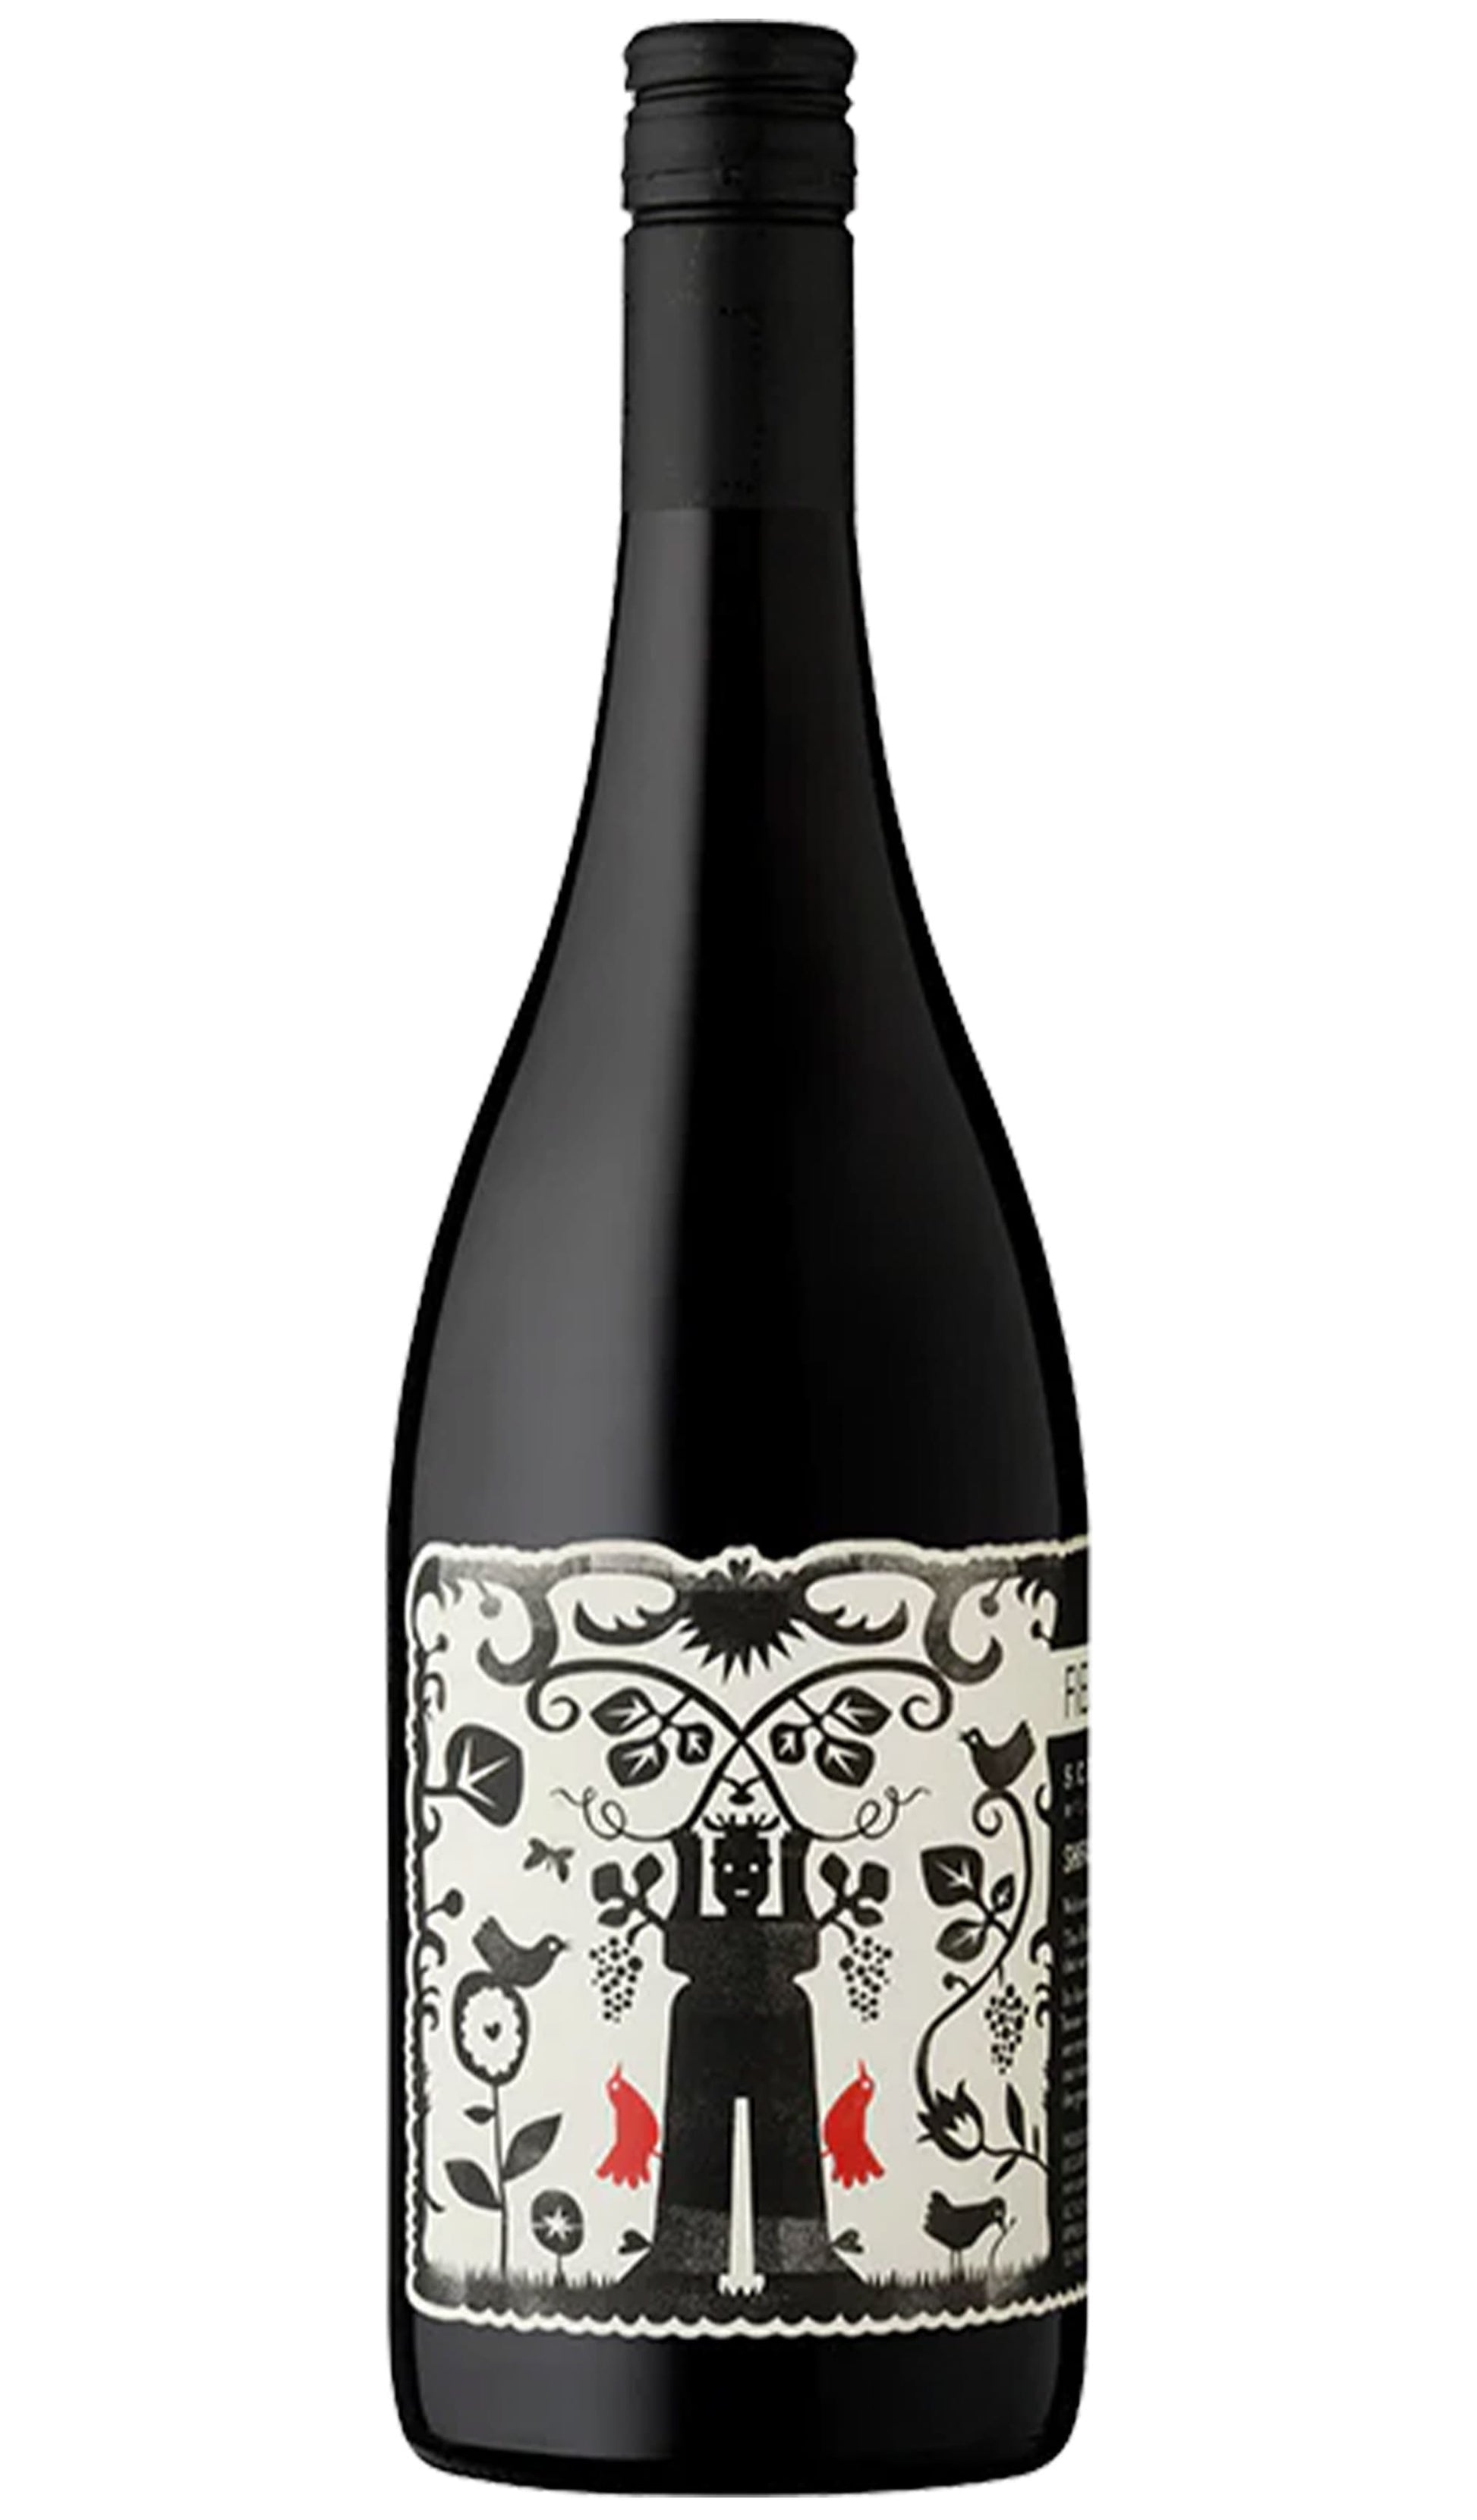 Find out more or buy SC Pannell McLaren Vale Field Street Shiraz 2022 online at Wine Sellers Direct - Australia’s independent liquor specialists.